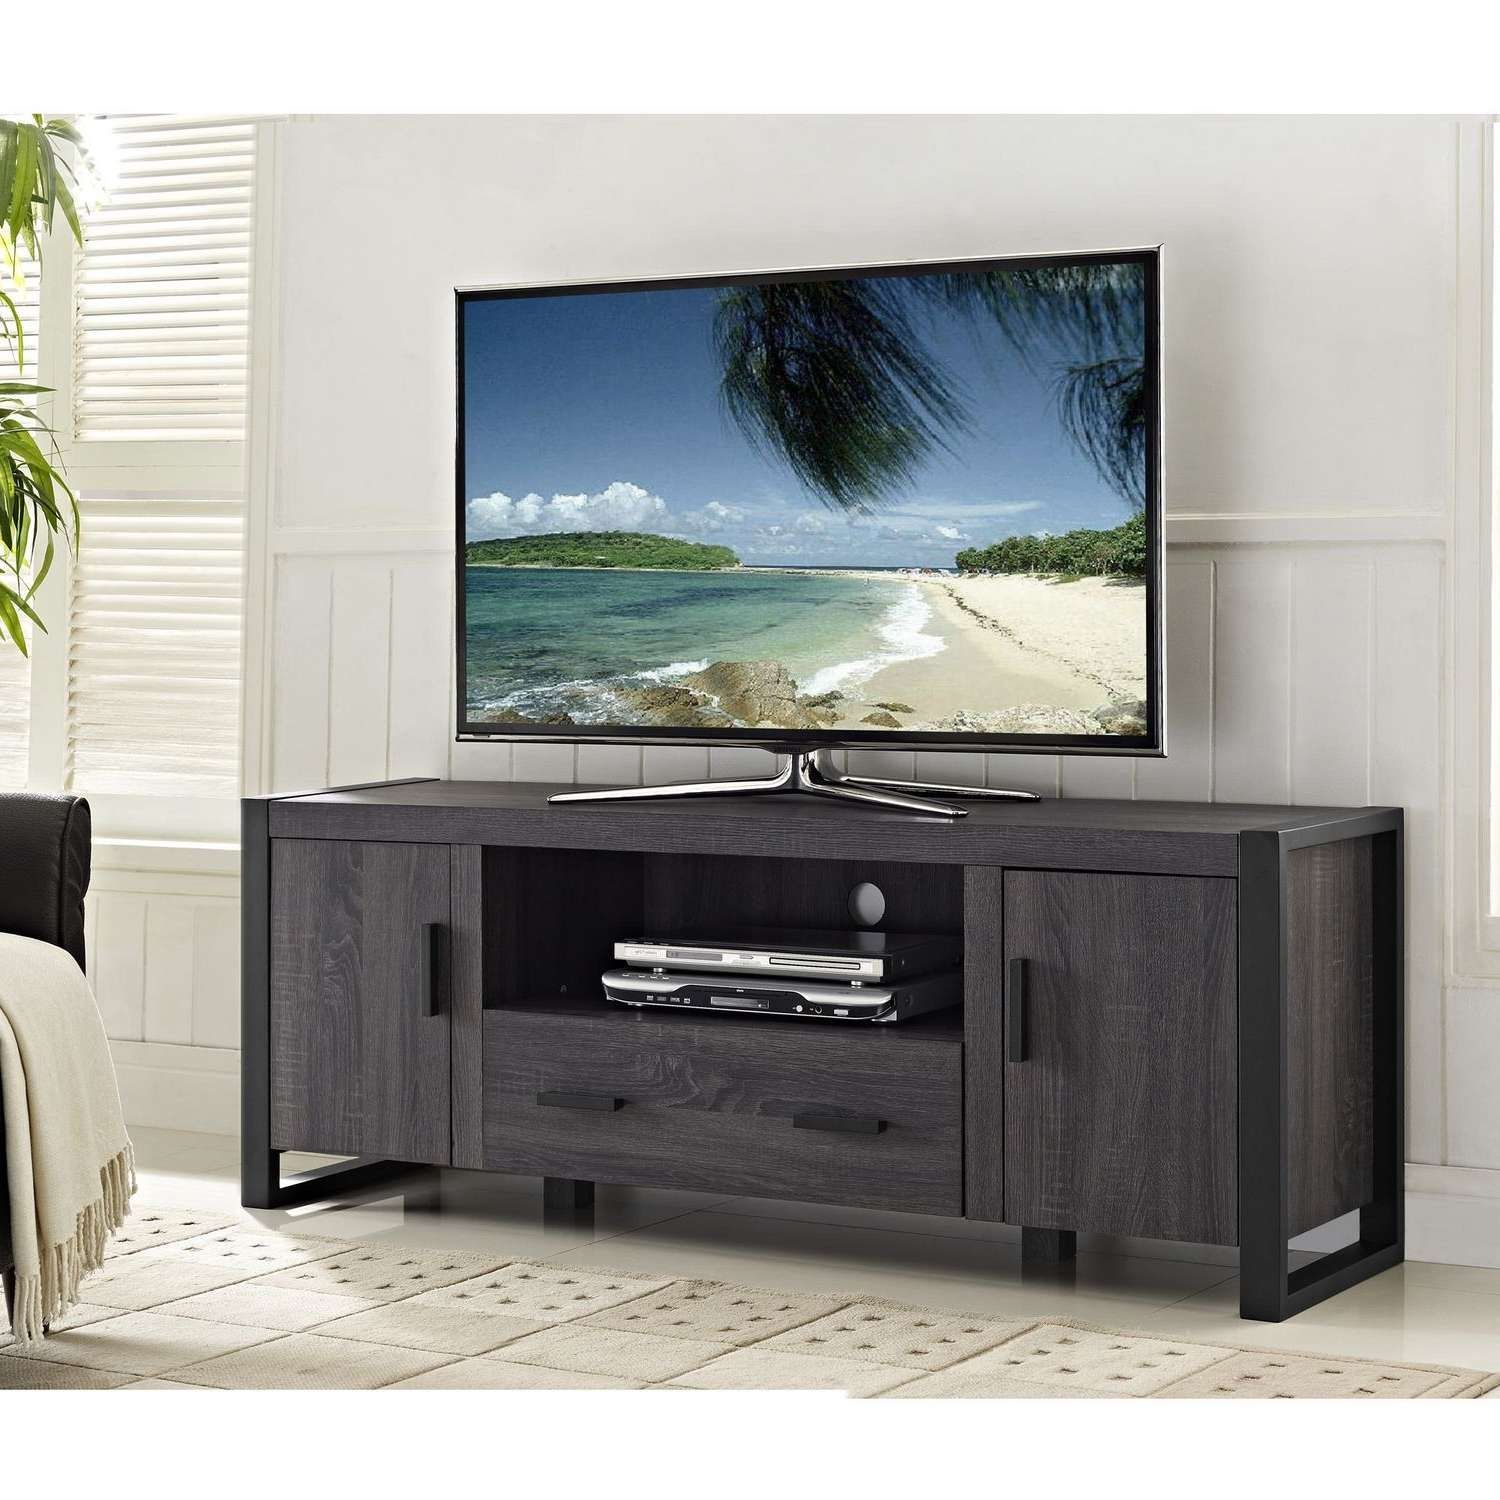 We Furniture 60" Grey Wood Tv Stand Console | Walmart Canada With Grey Wood Tv Stands (View 1 of 15)